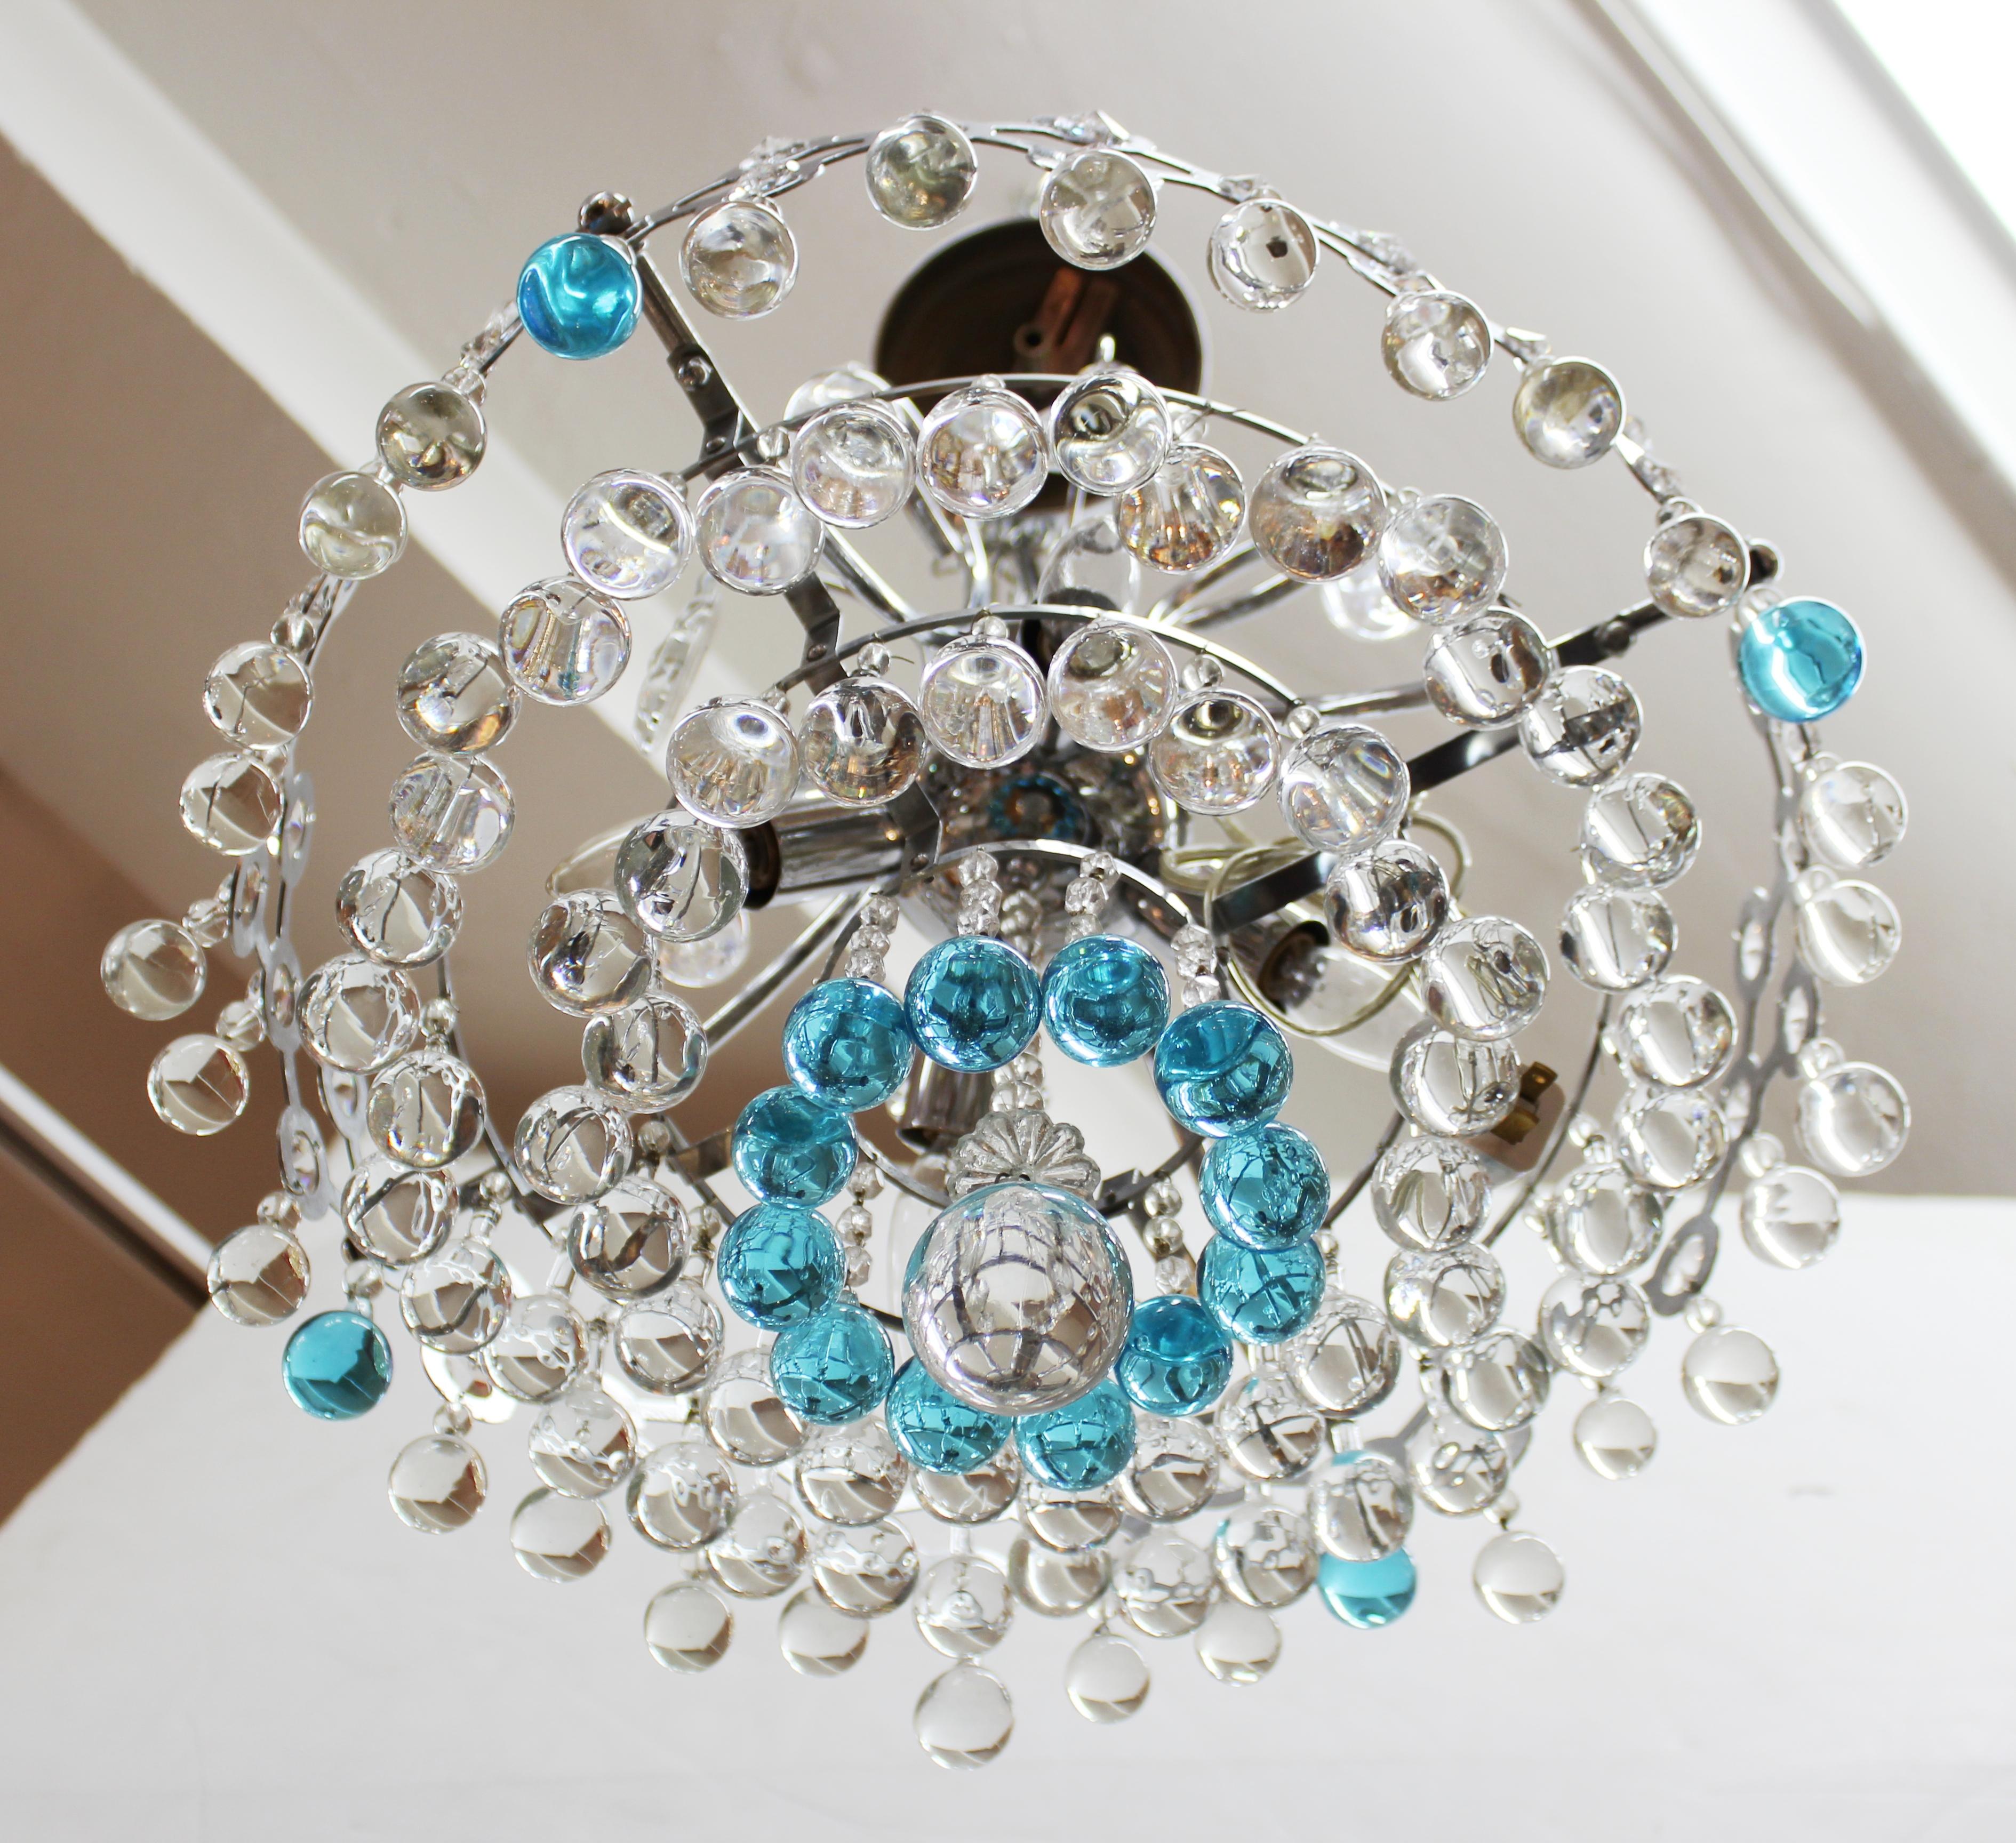 Italian Mid-Century Modern Chrome Chandelier with Clear & Turquoise Glass Balls 5